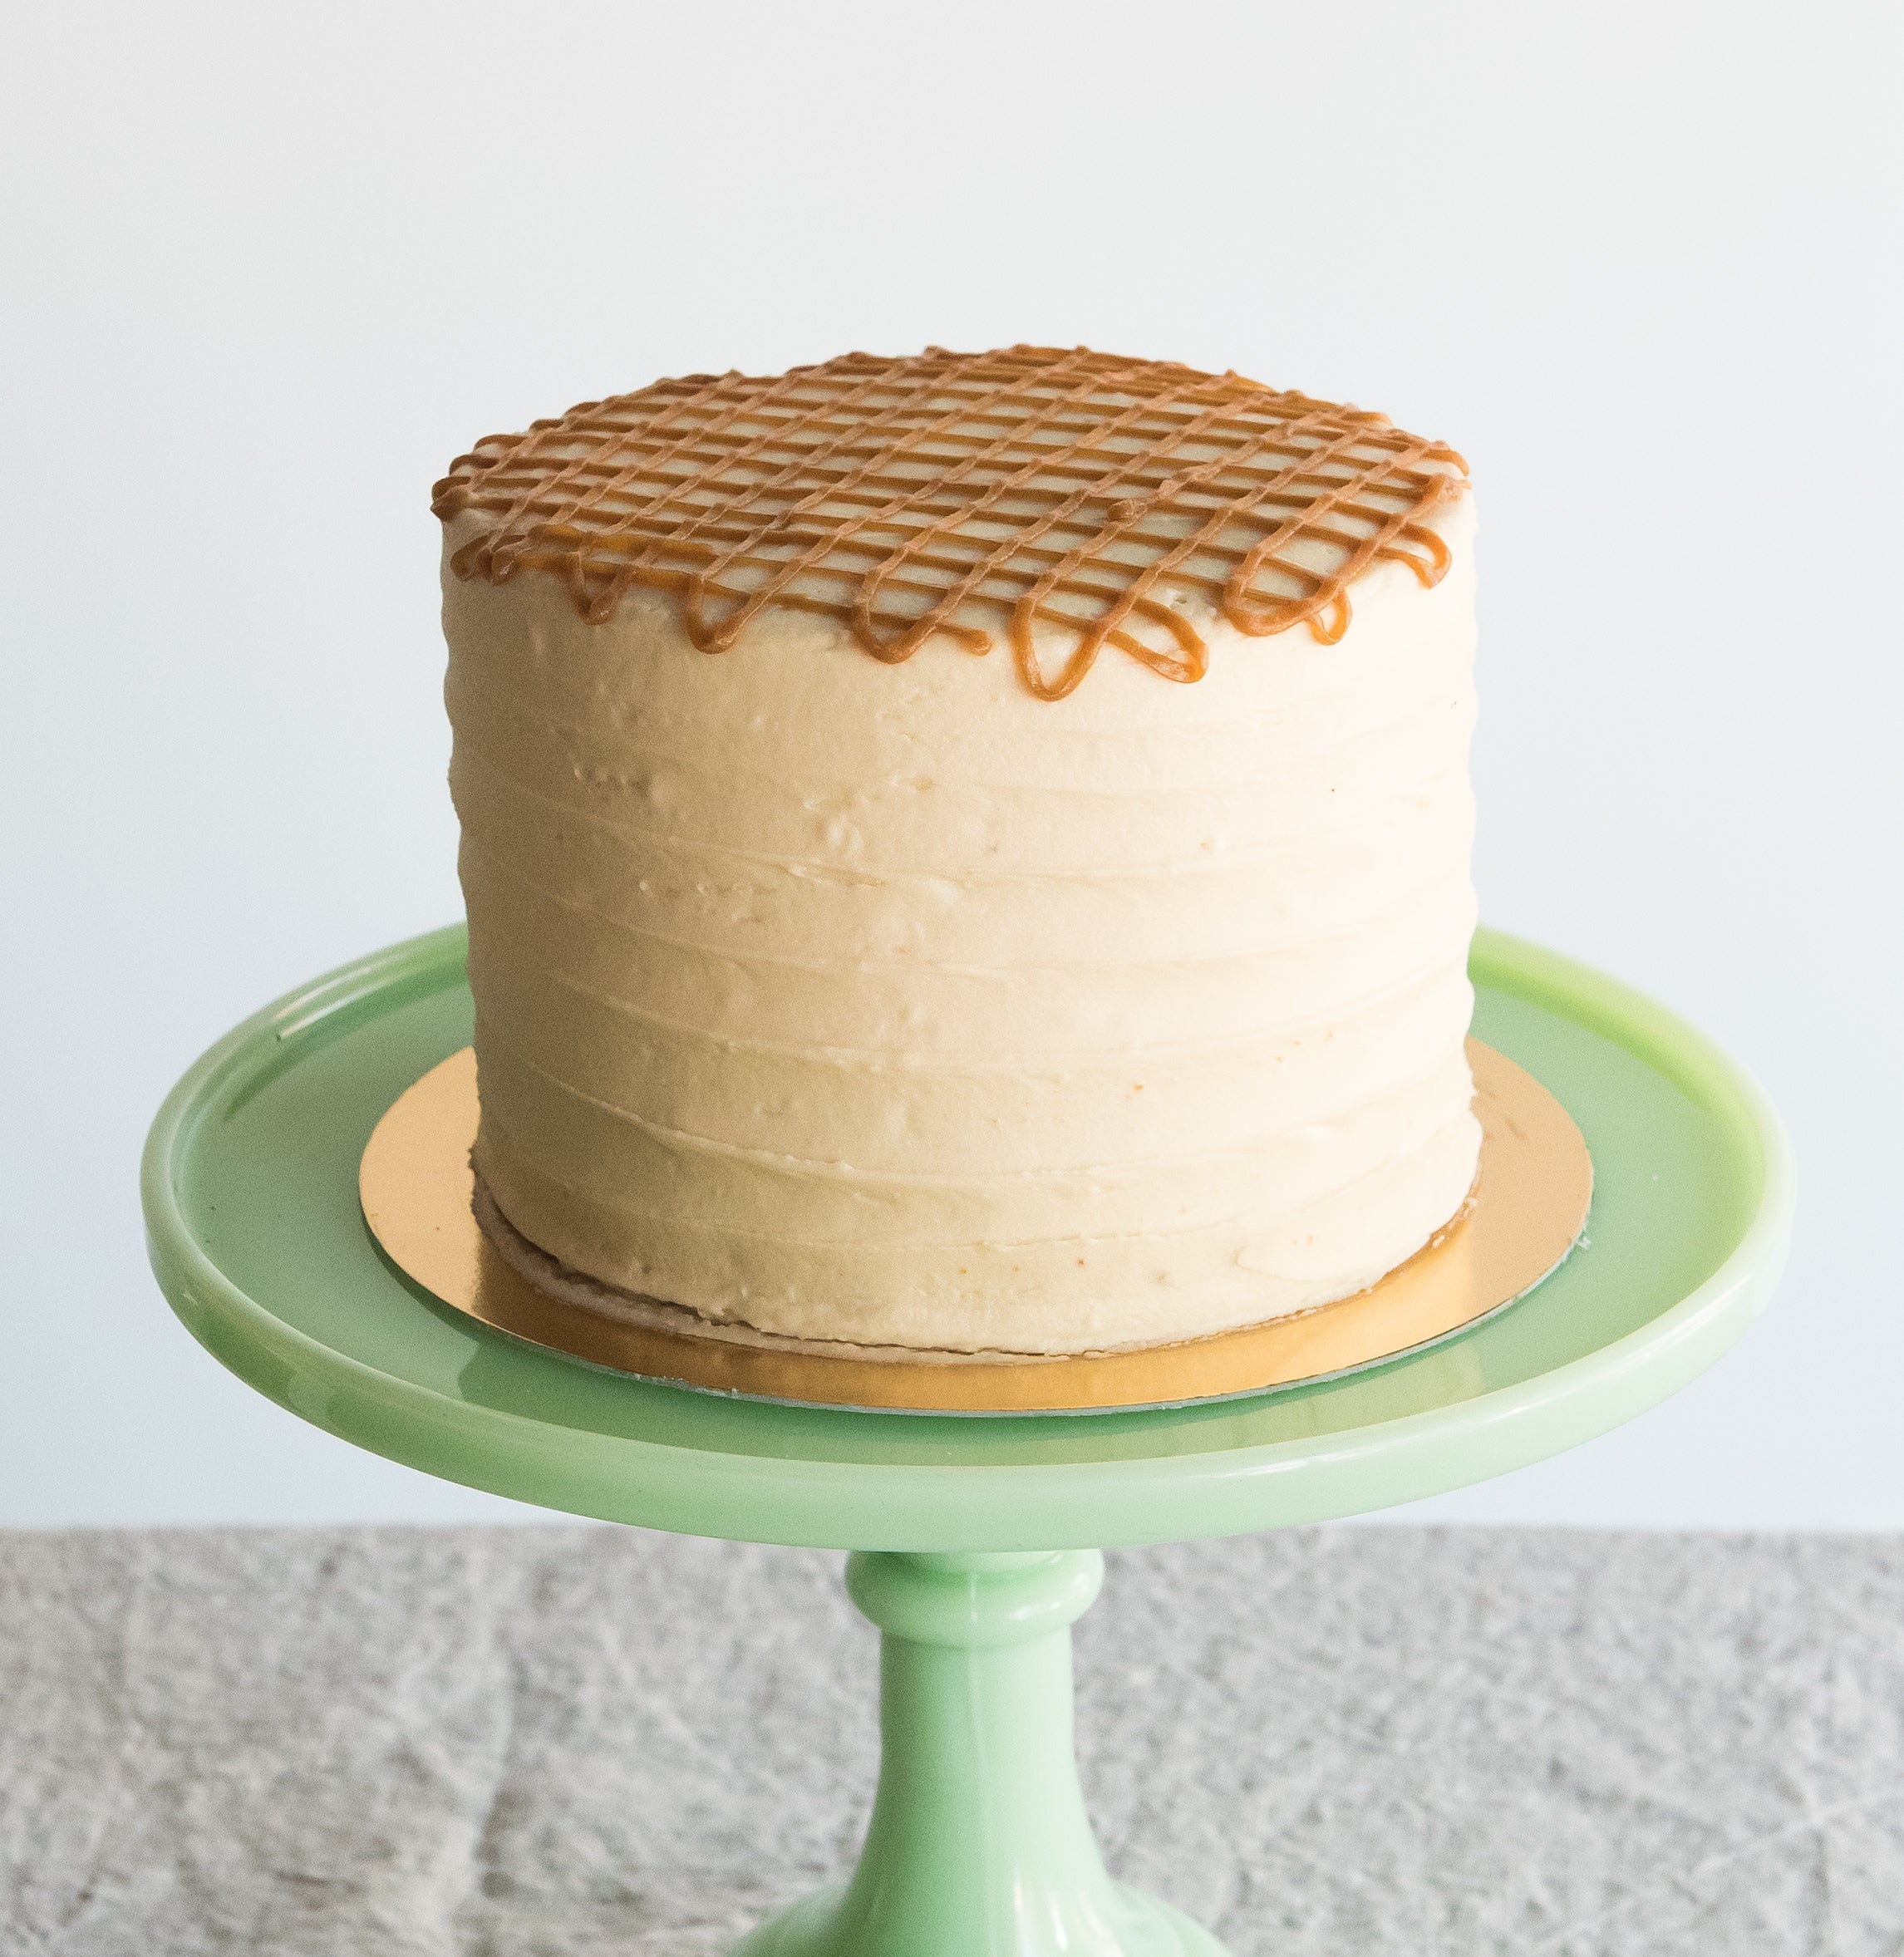 Salted Vanilla Cake with Salted Caramel Buttercream